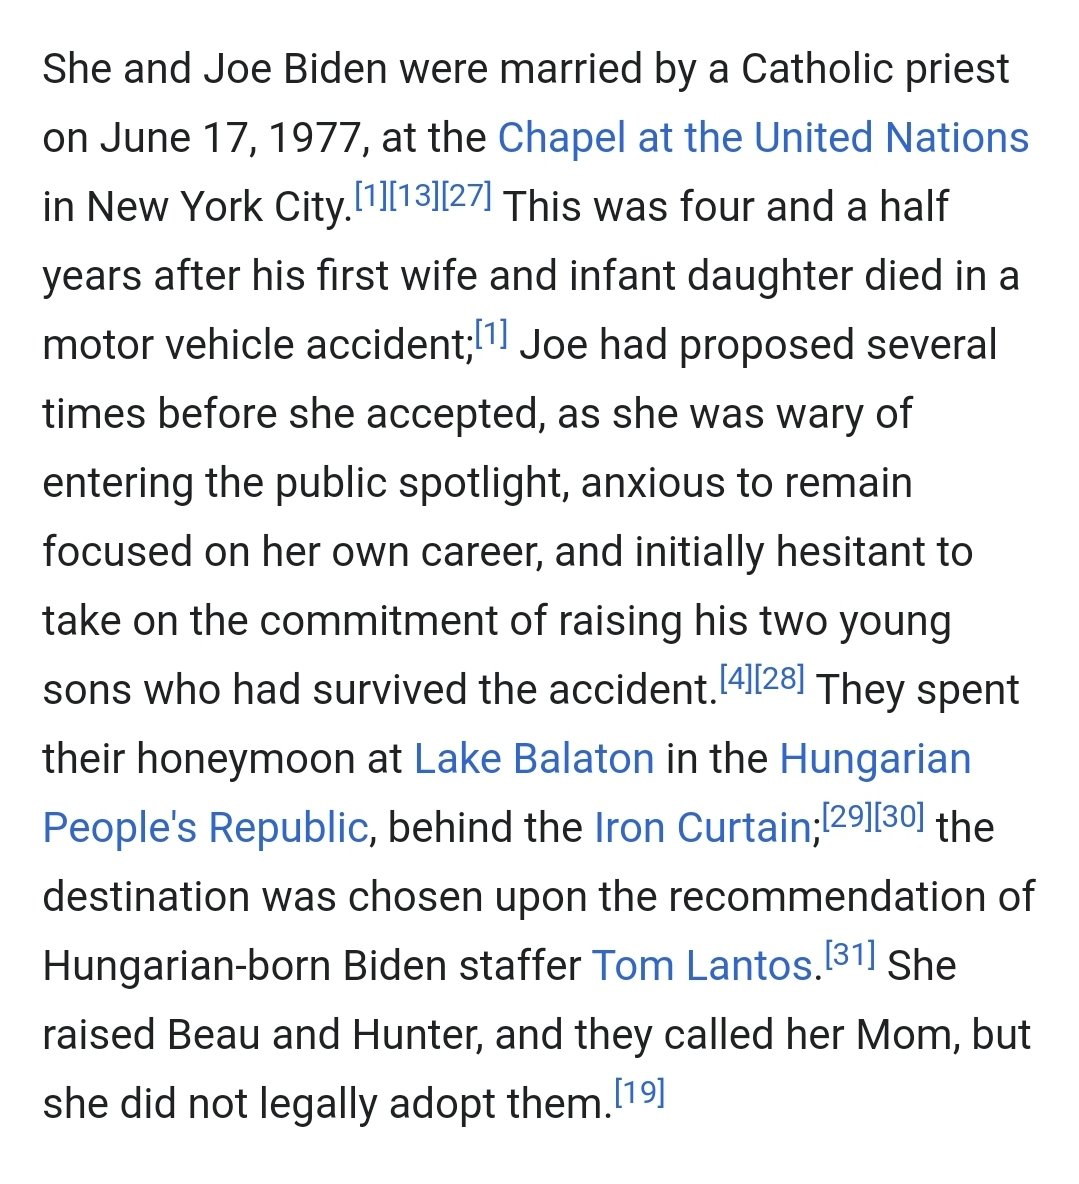 25/ On June 17, 1977, Joe and Jill married. At that point, Jill's alimony stopped. From Wikipedia: